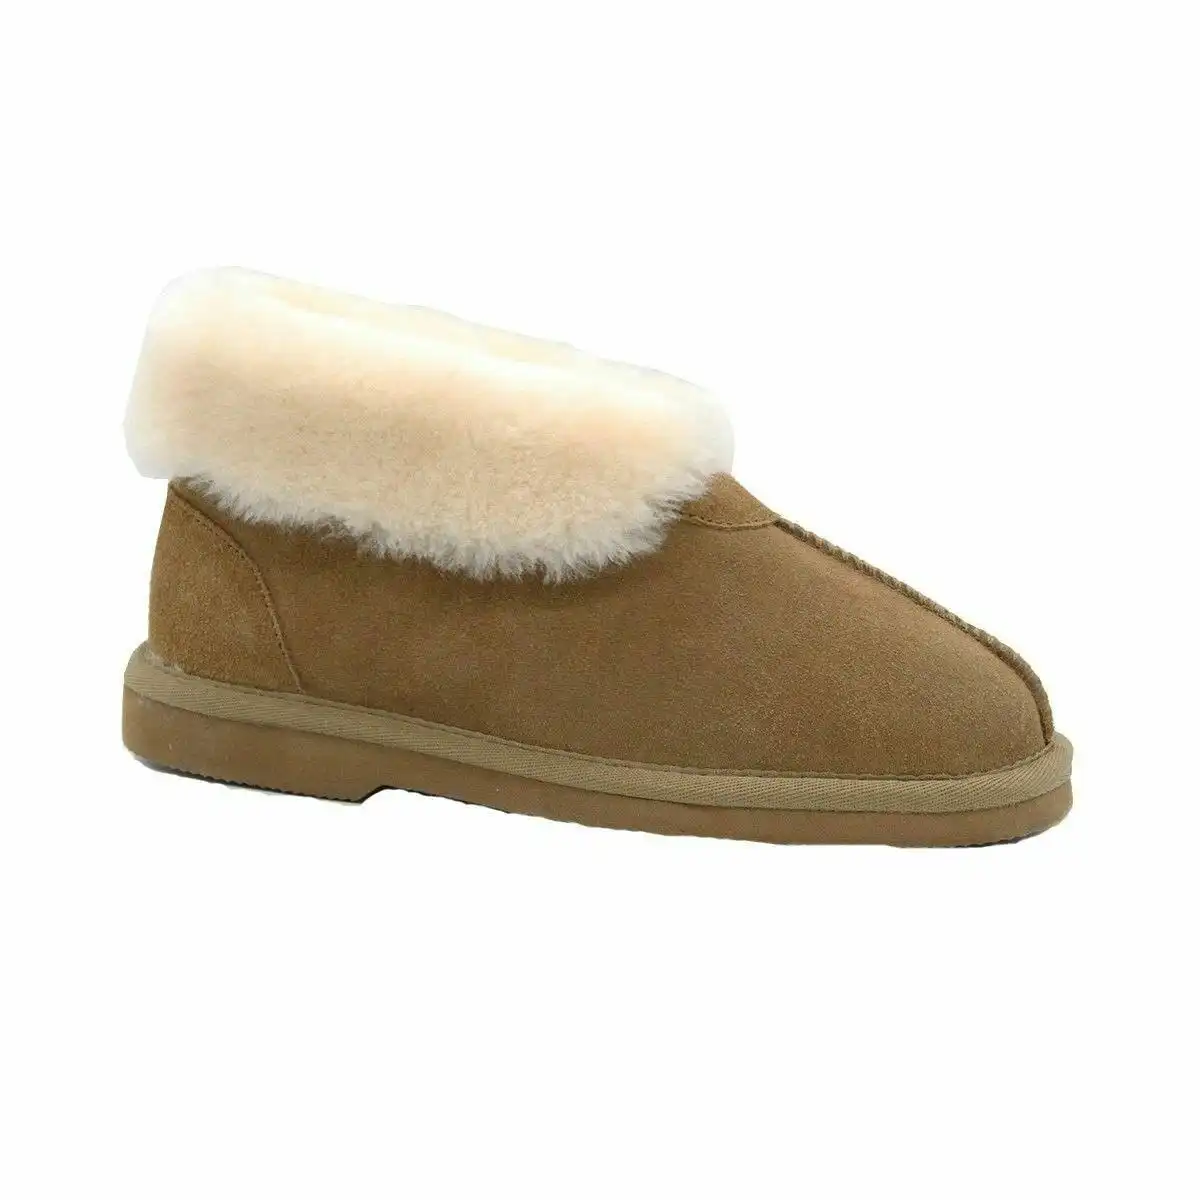 Womens Ugg Short Boots Suede Leather Sheepskin Grosby Princess Chestnut Slippers